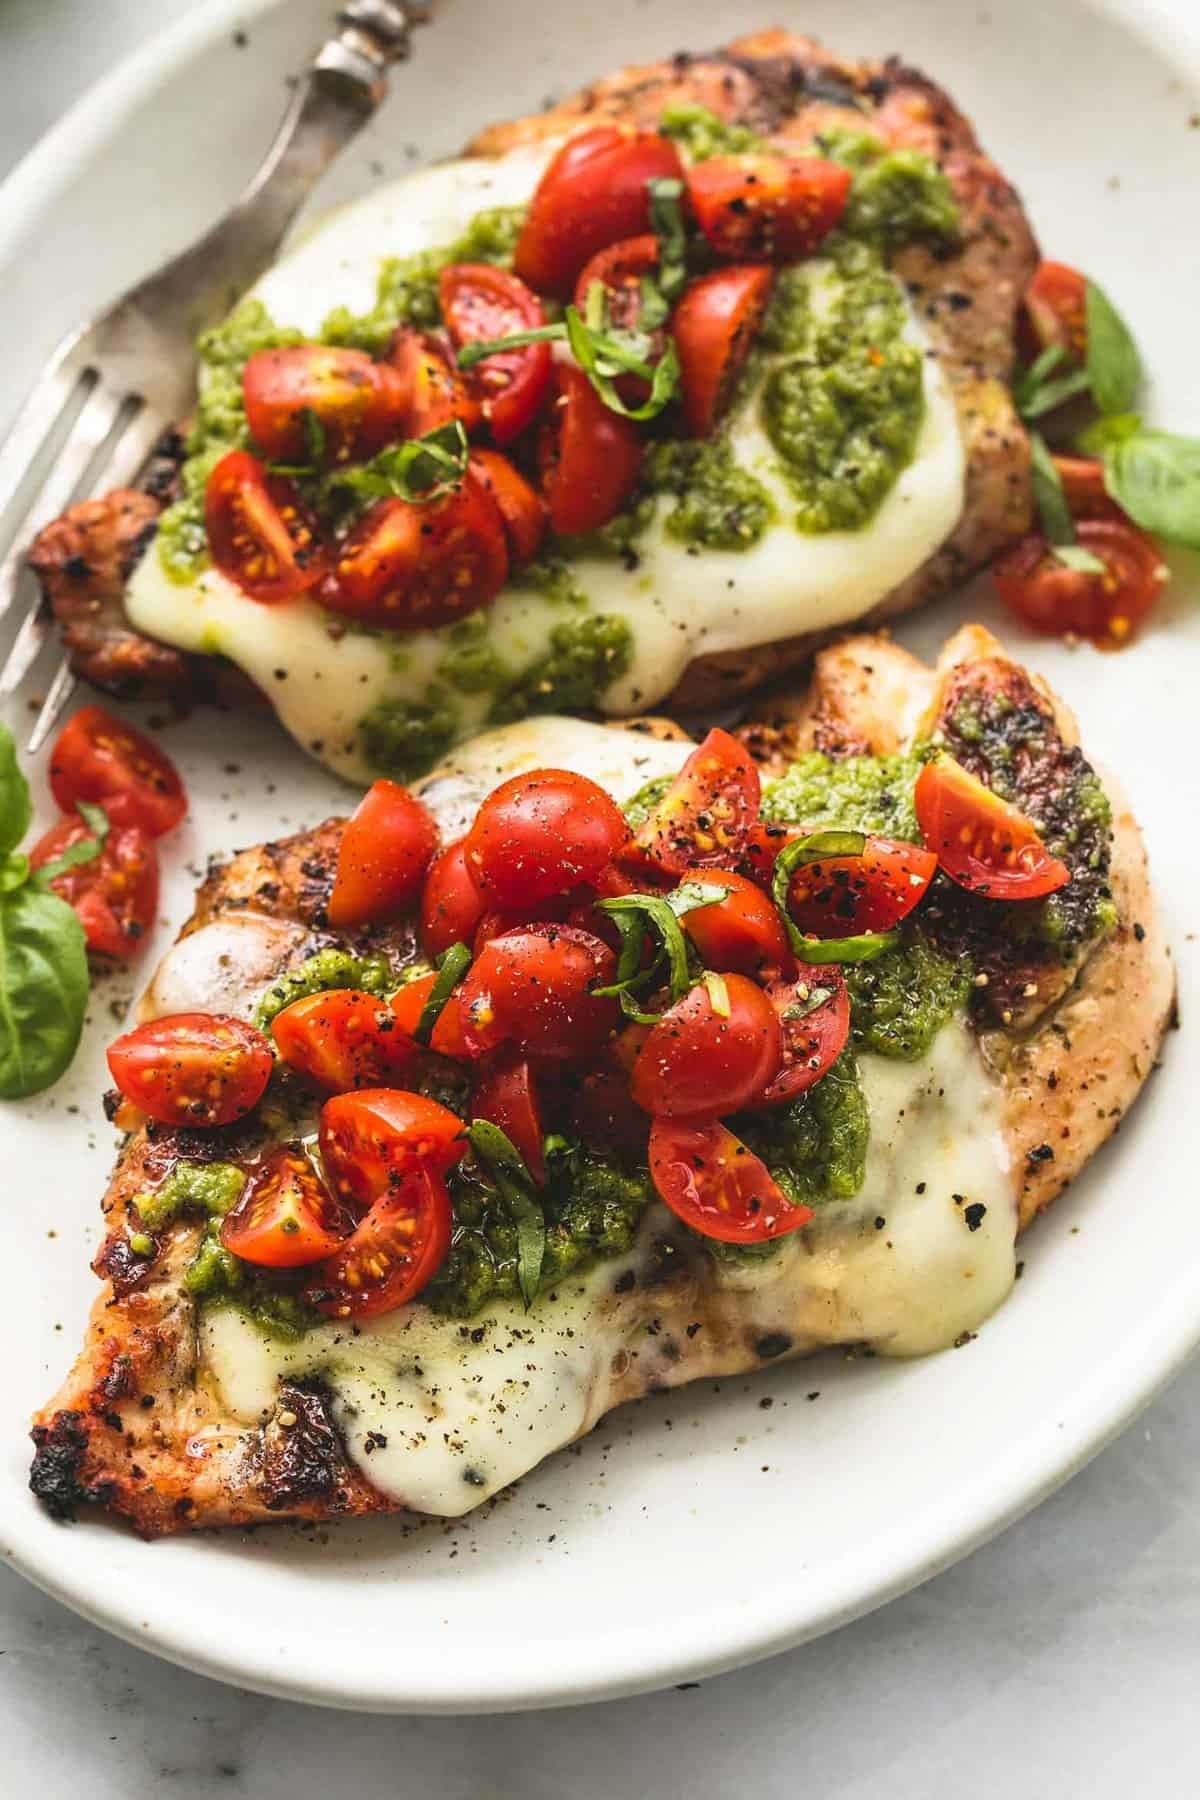 Grilled chicken with mozarella, tomatoes, and pesto.